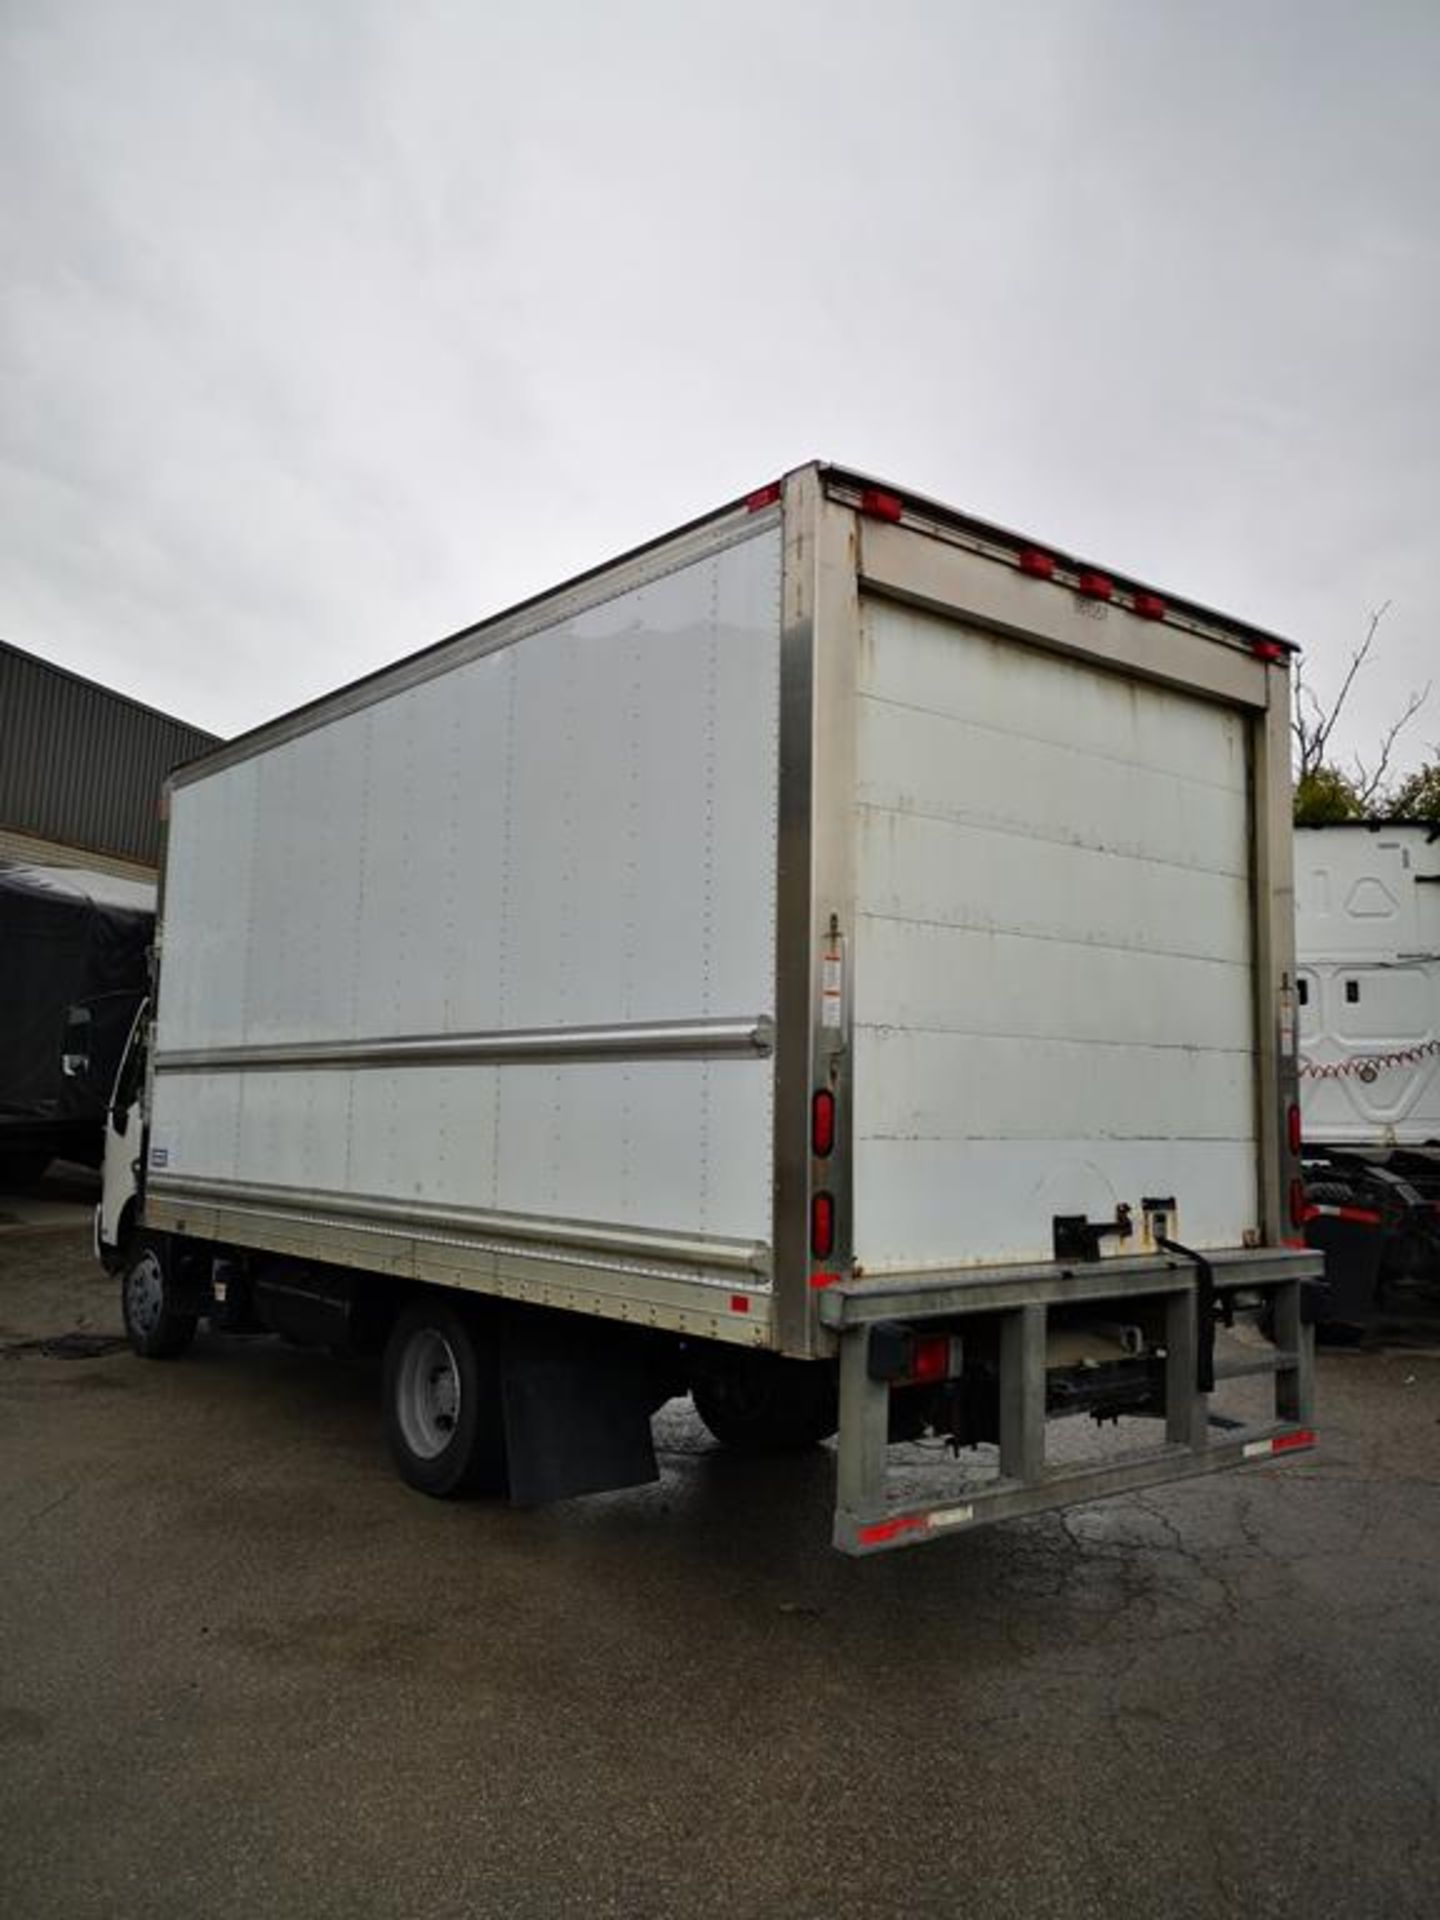 2013, HINO, 195, REEFER TRUCK, MORGAN, 18', INSULATED BOX, THERMOKING, T800 WHISPER, REEFER, - Image 6 of 27